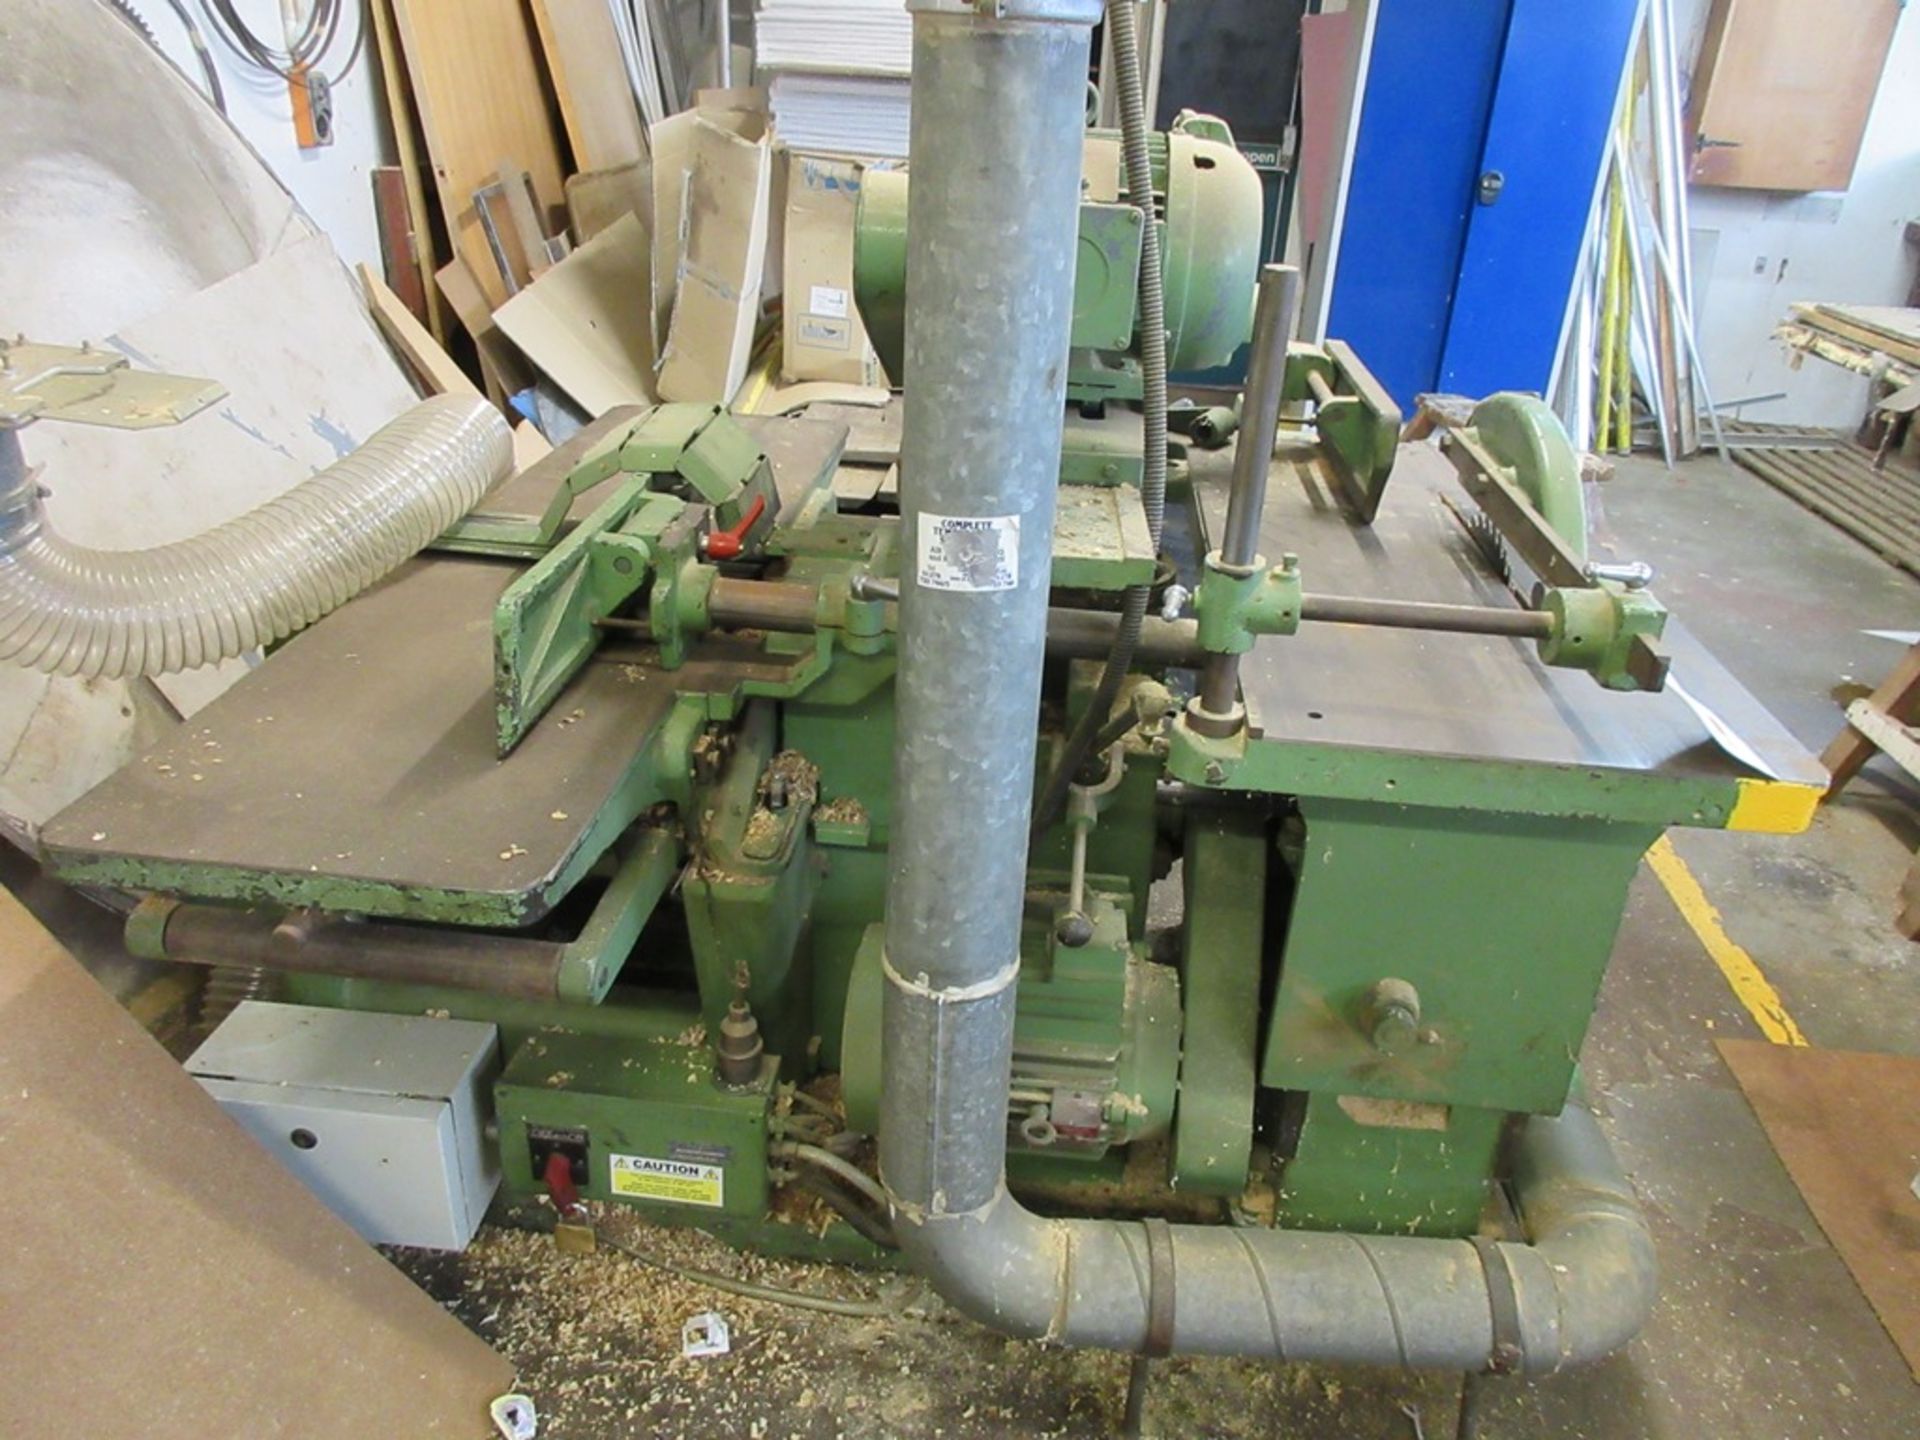 Dominion saw bench / thicknesser planer and cross cut saw, no. 266986, 1.6m x 1.6m, 3 phase, with - Image 7 of 9